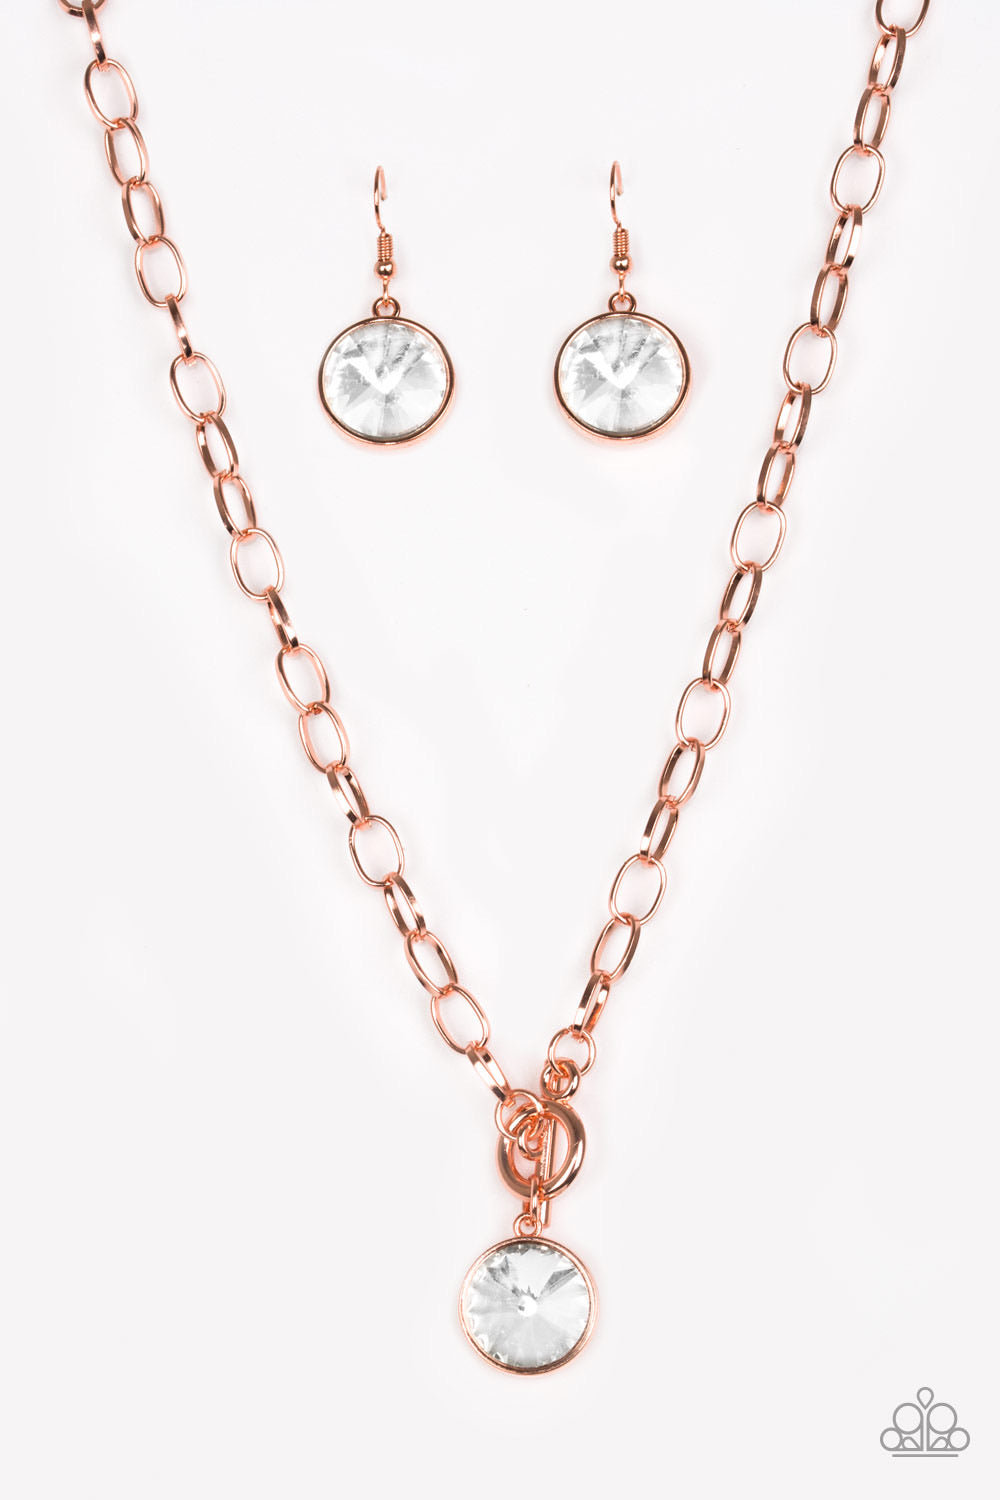 She Sparkles On - Copper Earring & Necklace Set